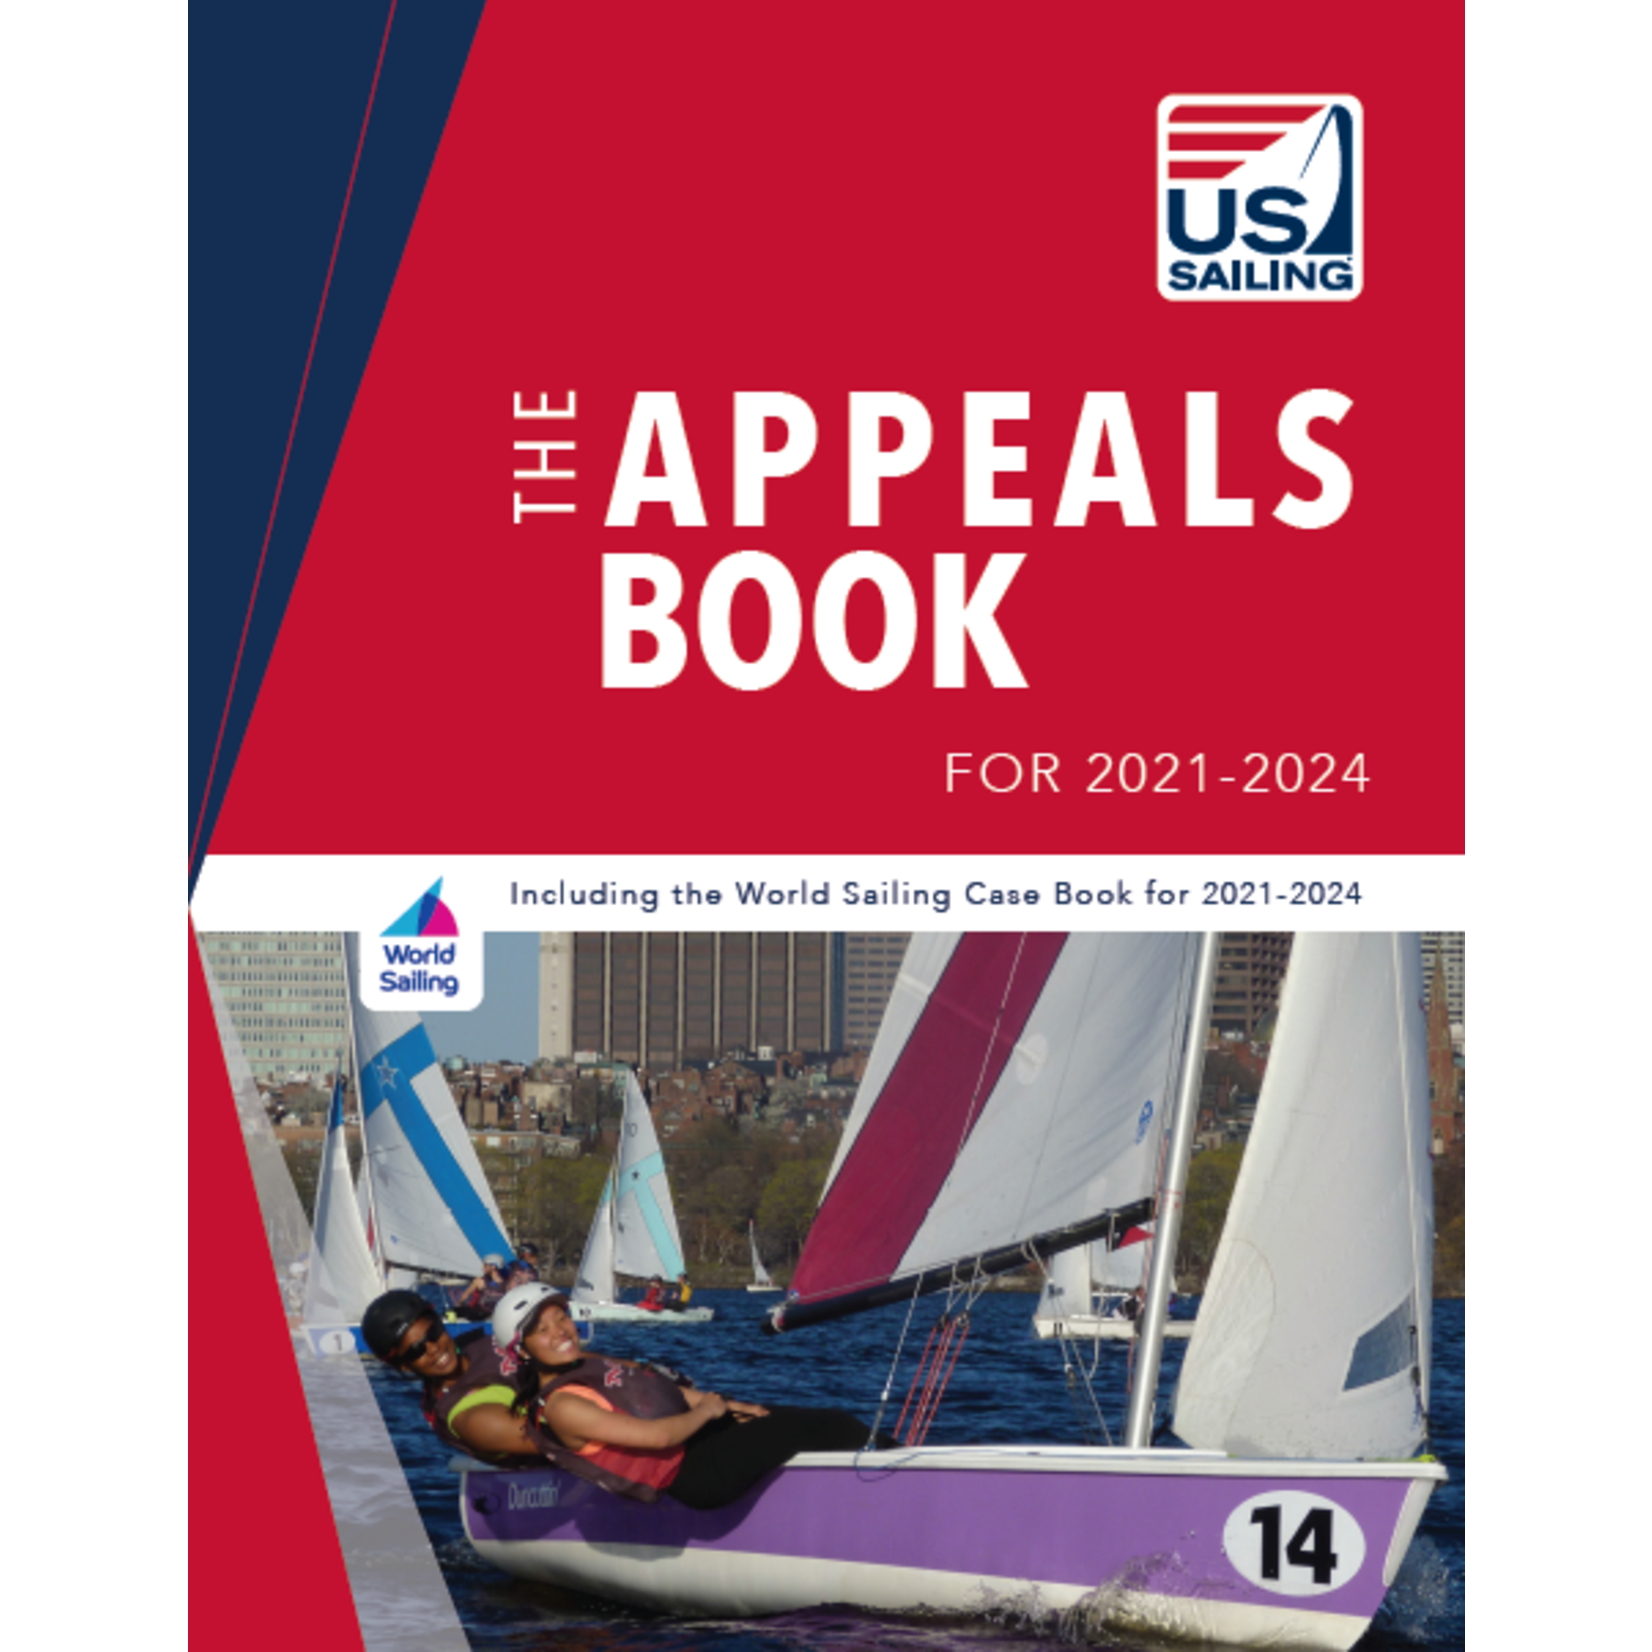 TEXT The Appeals Book for 2021-2024, Including the World Sailing Case Book for 2021-2024